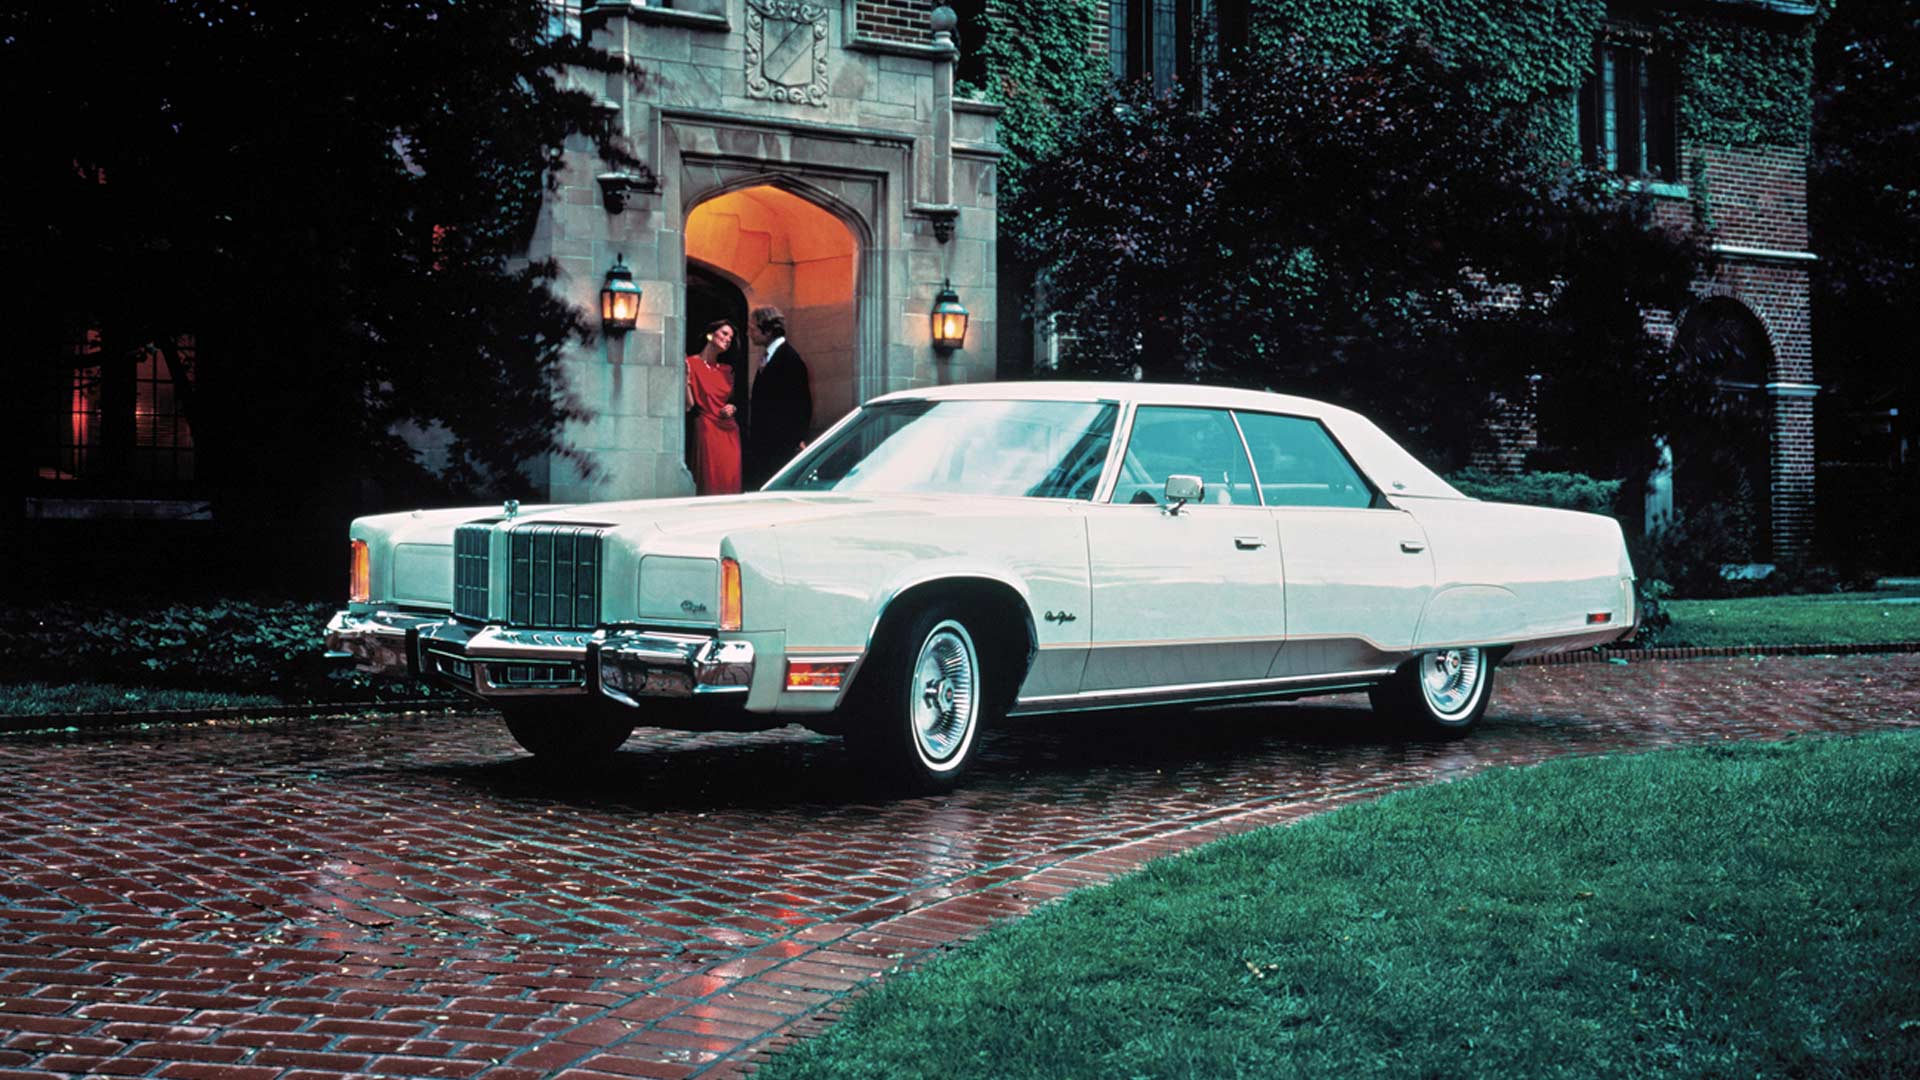 <p>By the late 1970s, land yachts like the New Yorker were bigger than disco music. But 1978 would be the final year of the Chrysler ‘C-body’ platform that had seen service in many of the full-size machines on our list.</p> <p>A 6.6-liter (400-cubic inch) V8 came as standard, unless you happened to live in California or high-altitude states, where the smaller and cleaner 5.9-liter (360-ci) V8 was mandatory. On the options list was a AM/FM stereo with a search function operated by a foot switch, and even a CB radio.</p>